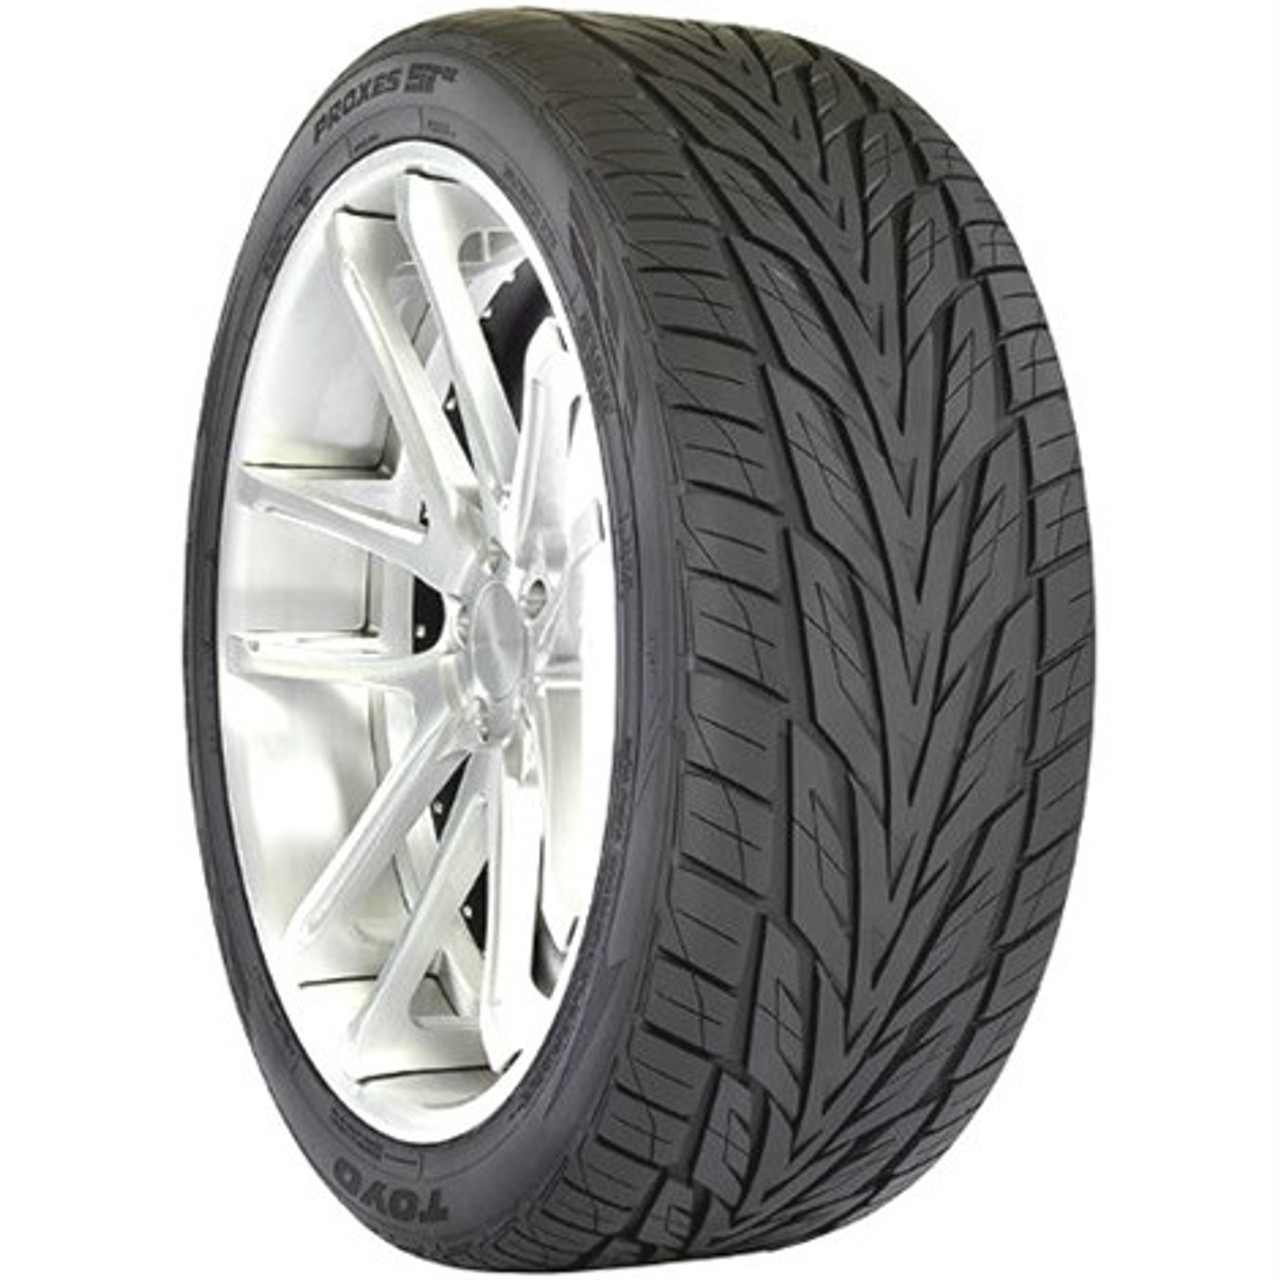 Toyo Proxes ST III Tire - 315/35R20